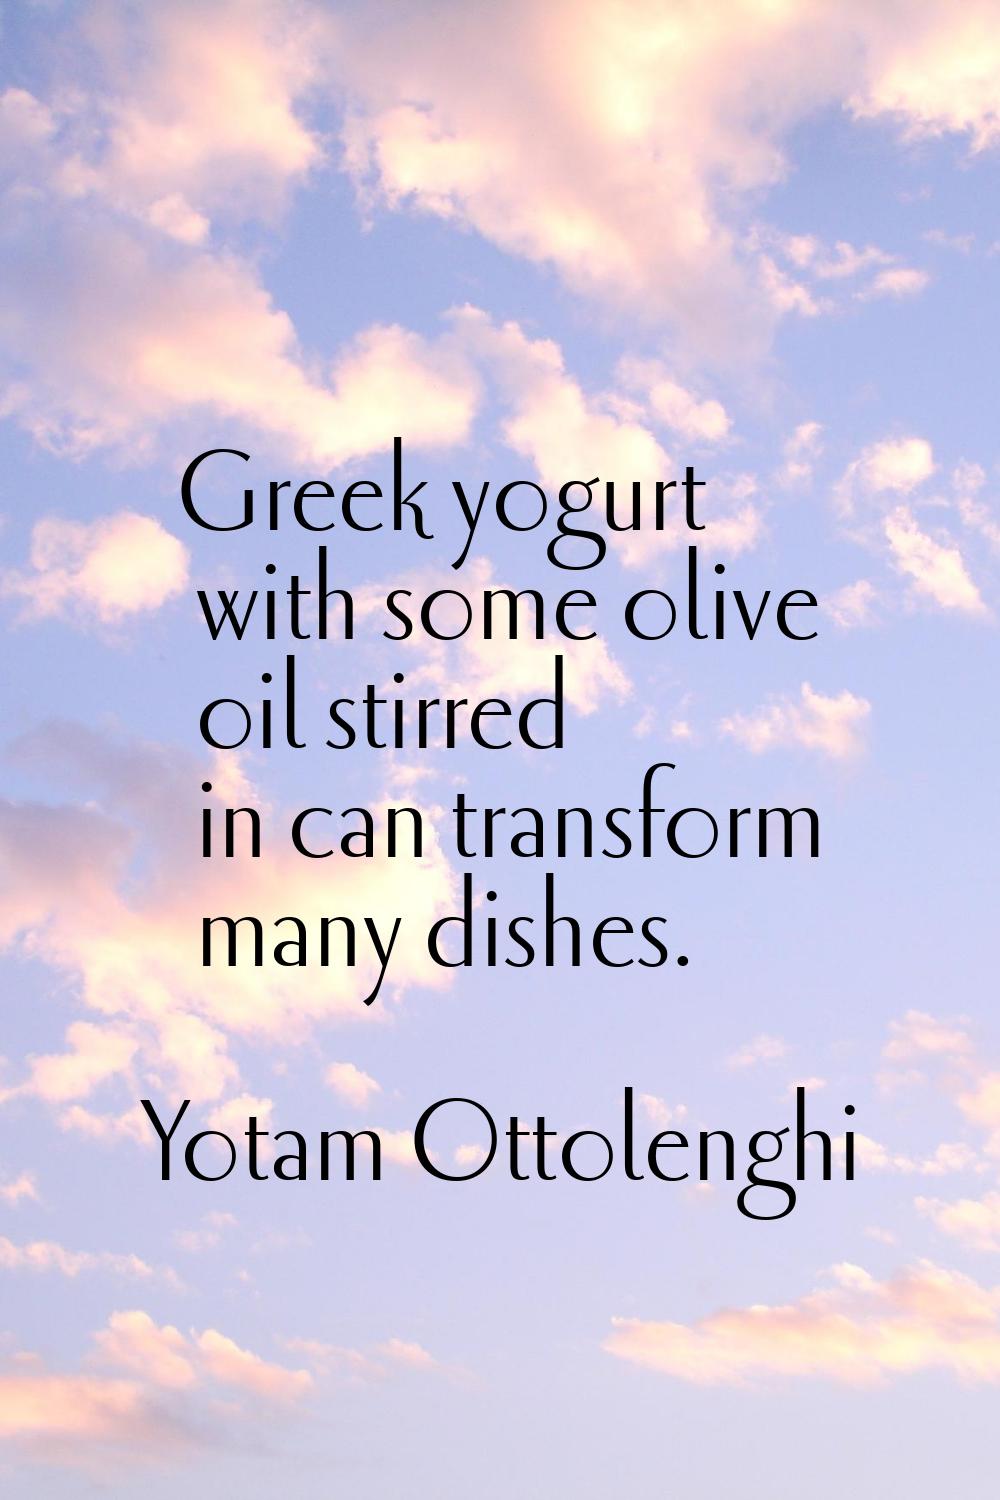 Greek yogurt with some olive oil stirred in can transform many dishes.